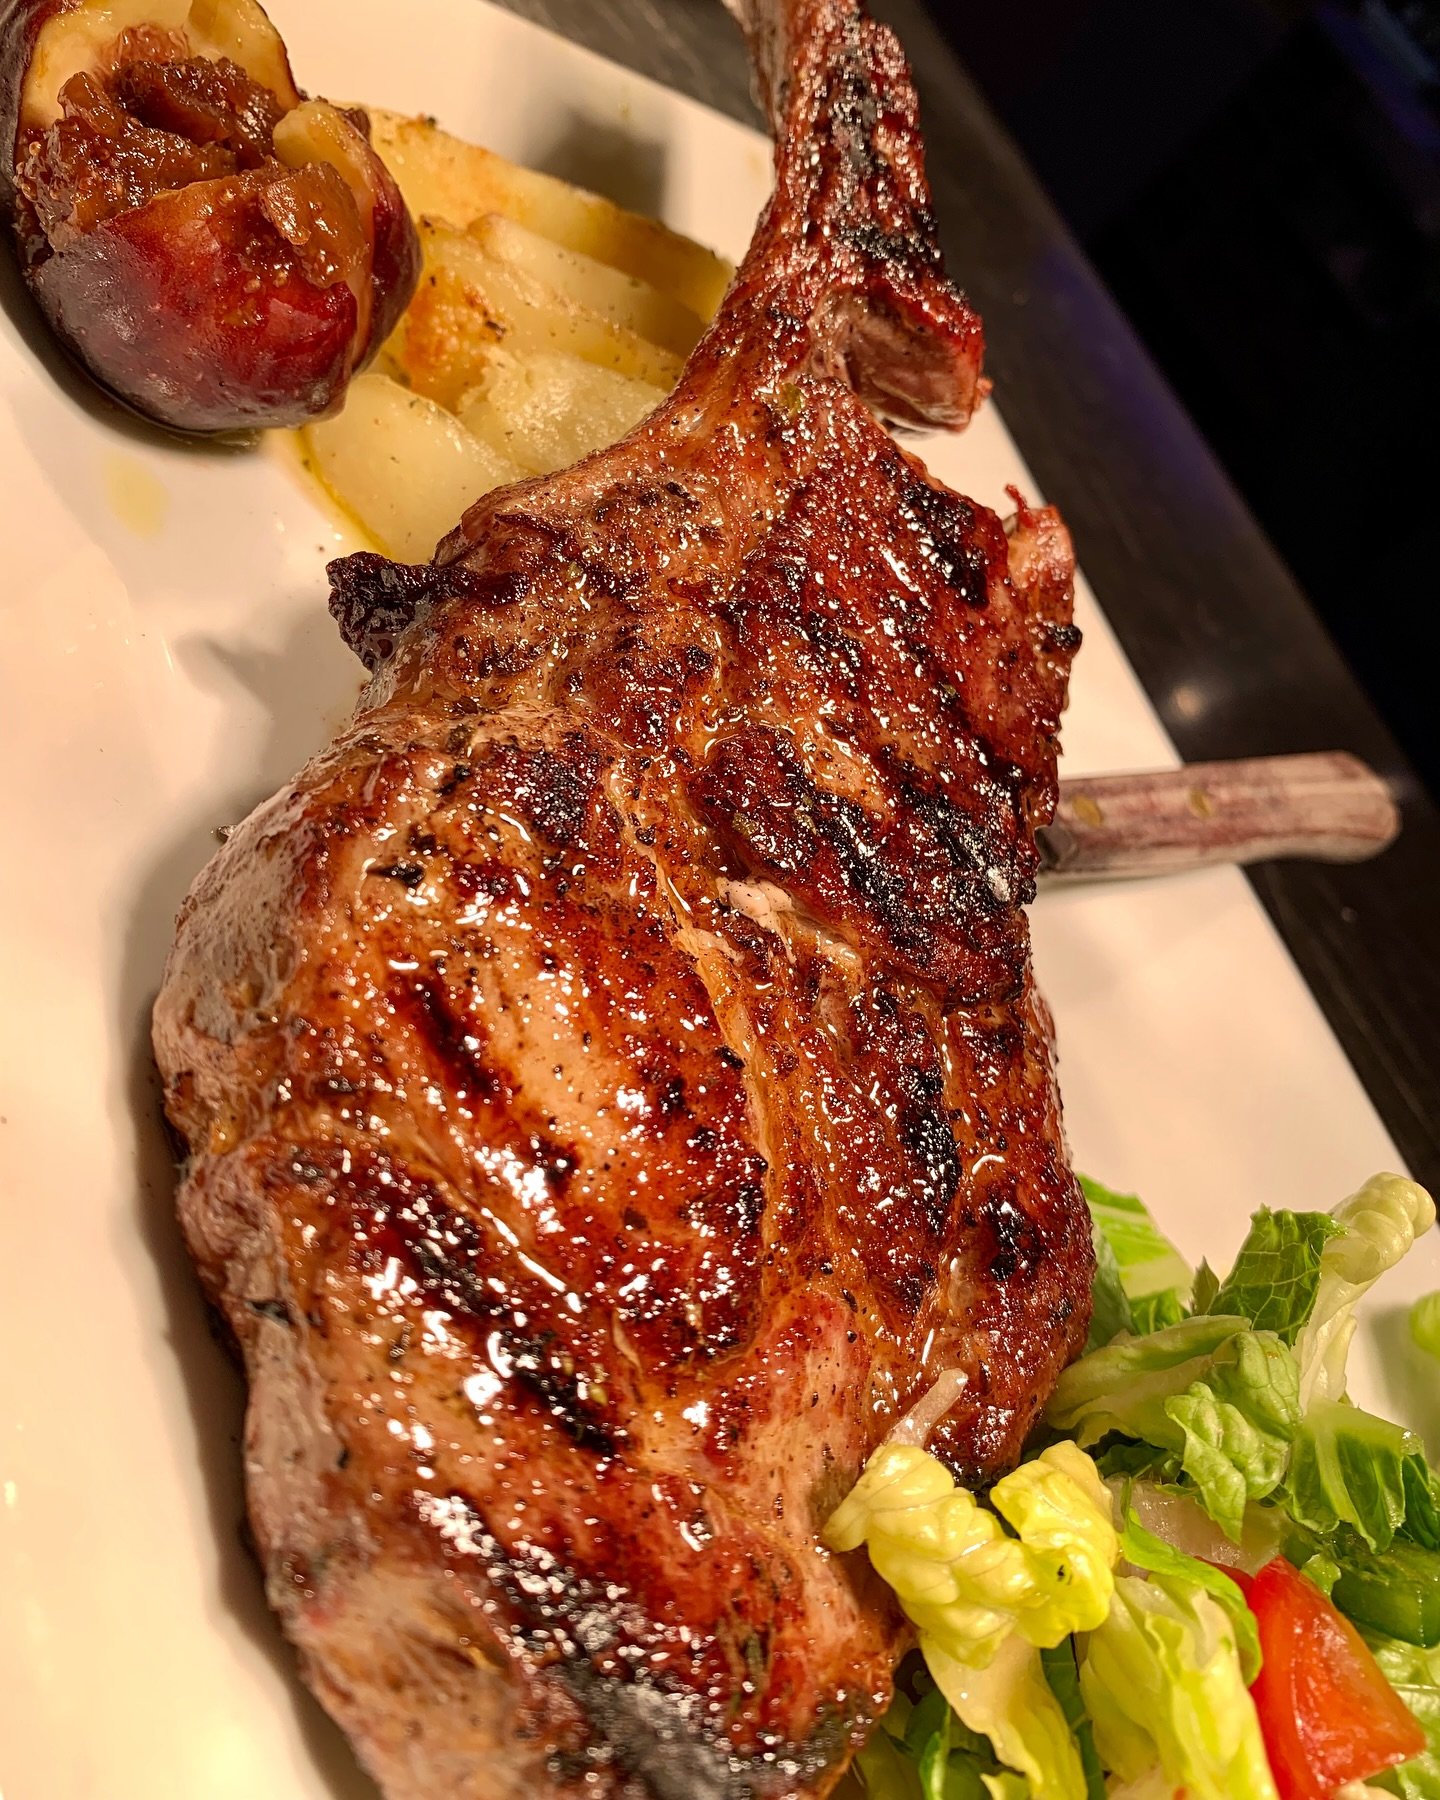 Craving a perfectly cooked slice of pork tomahawk? We&rsquo;ve got you covered with our decadent Brizola Hirini, served with lemon potatoes and a chopped salad. 😋

Visit https://www.kephigreek.kitchen/menu-1 to see our full menu for you to enjoy!